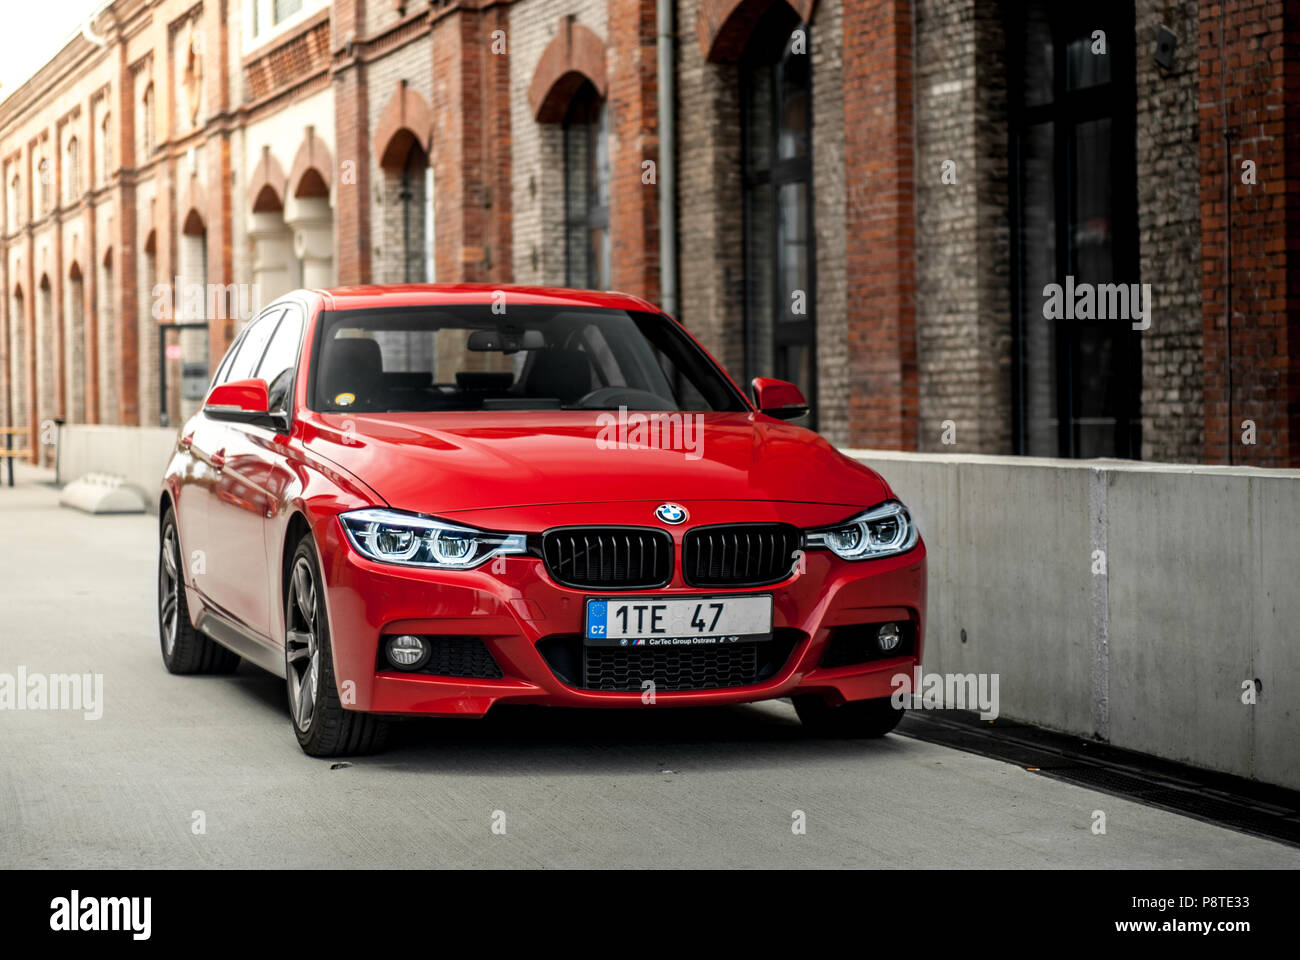 BMW 3 series parking in urban area Stock Photo